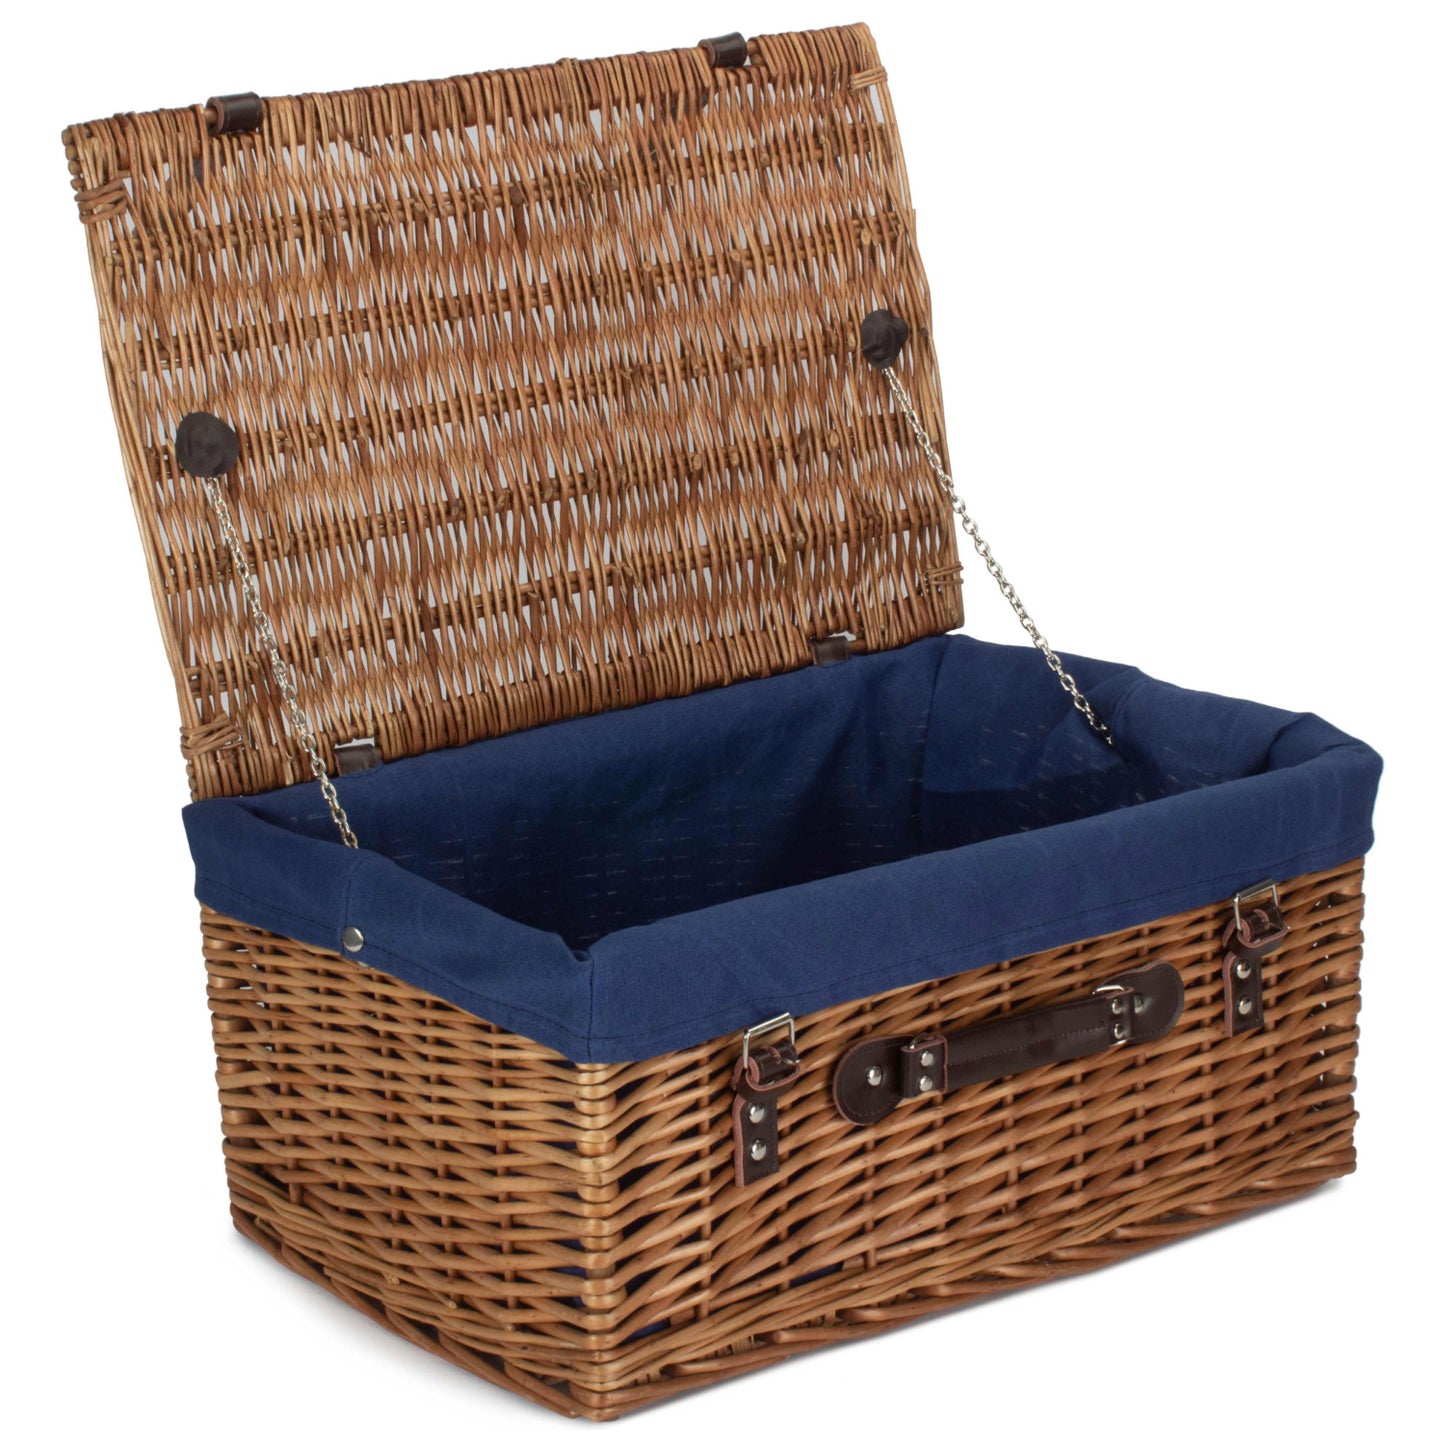 20 Inch Double Steamed Hamper With Navy Blue Lining